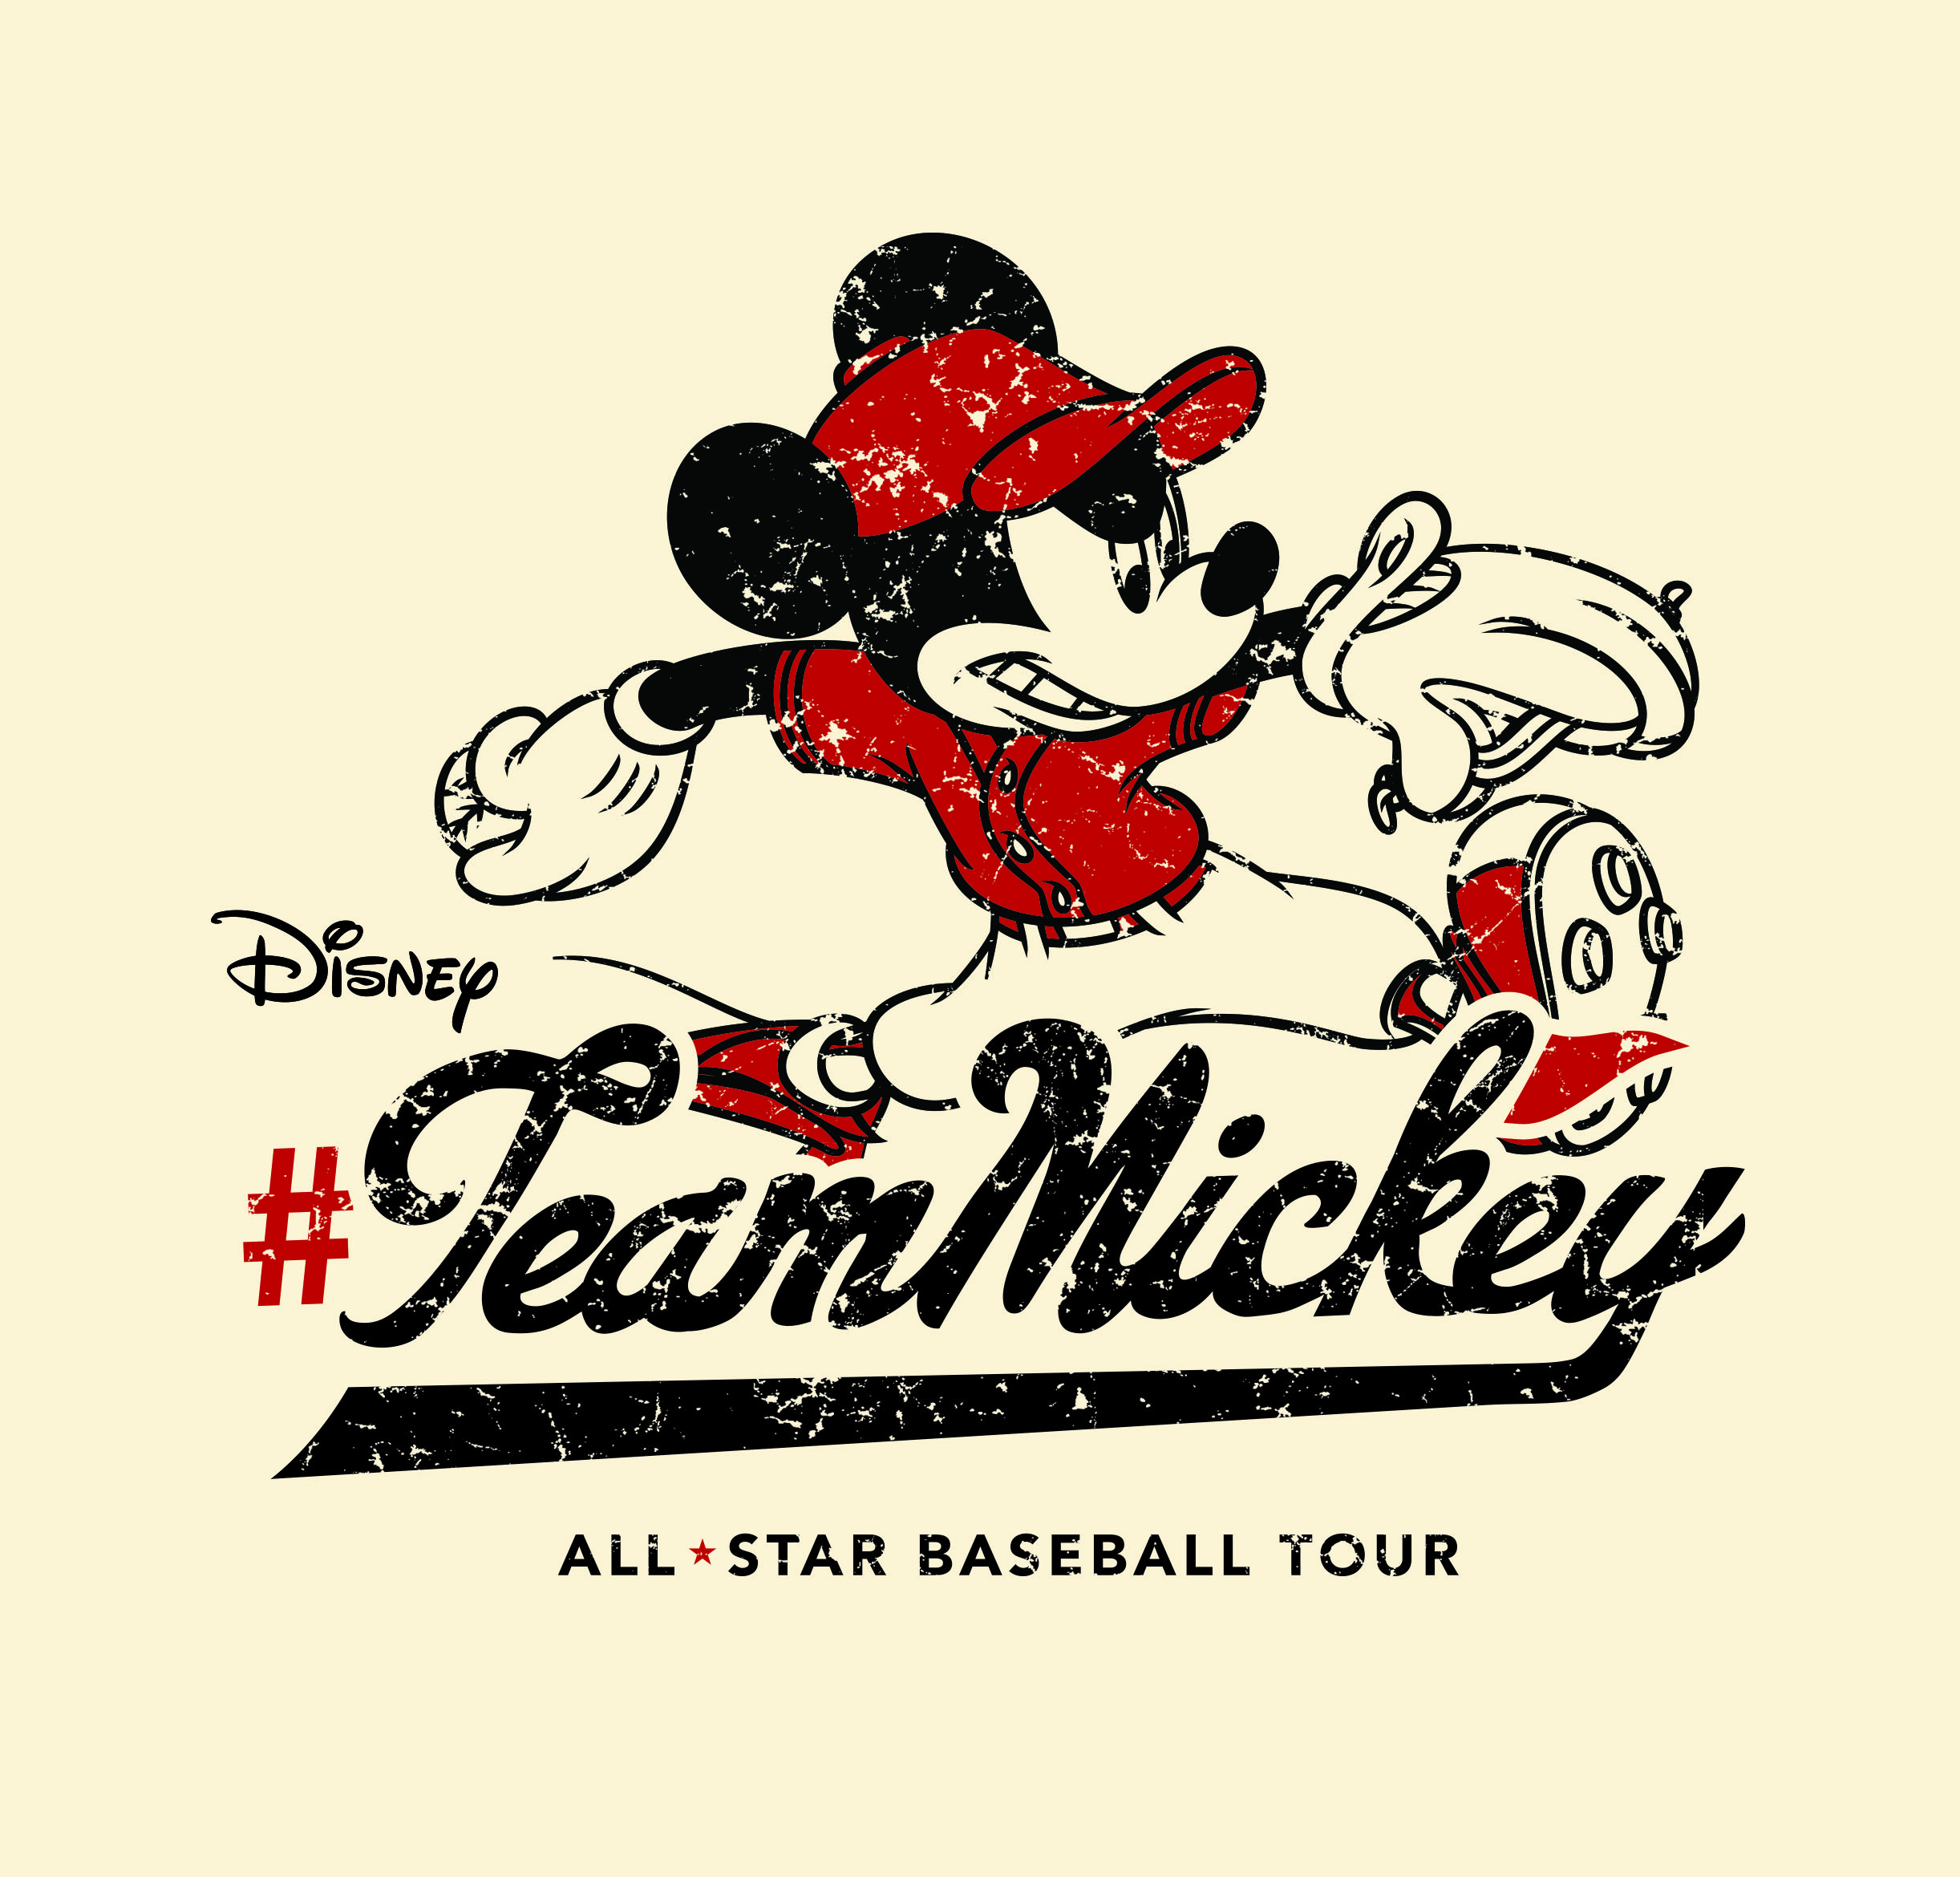 Announcing the TeamMickey All Star Baseball Tour